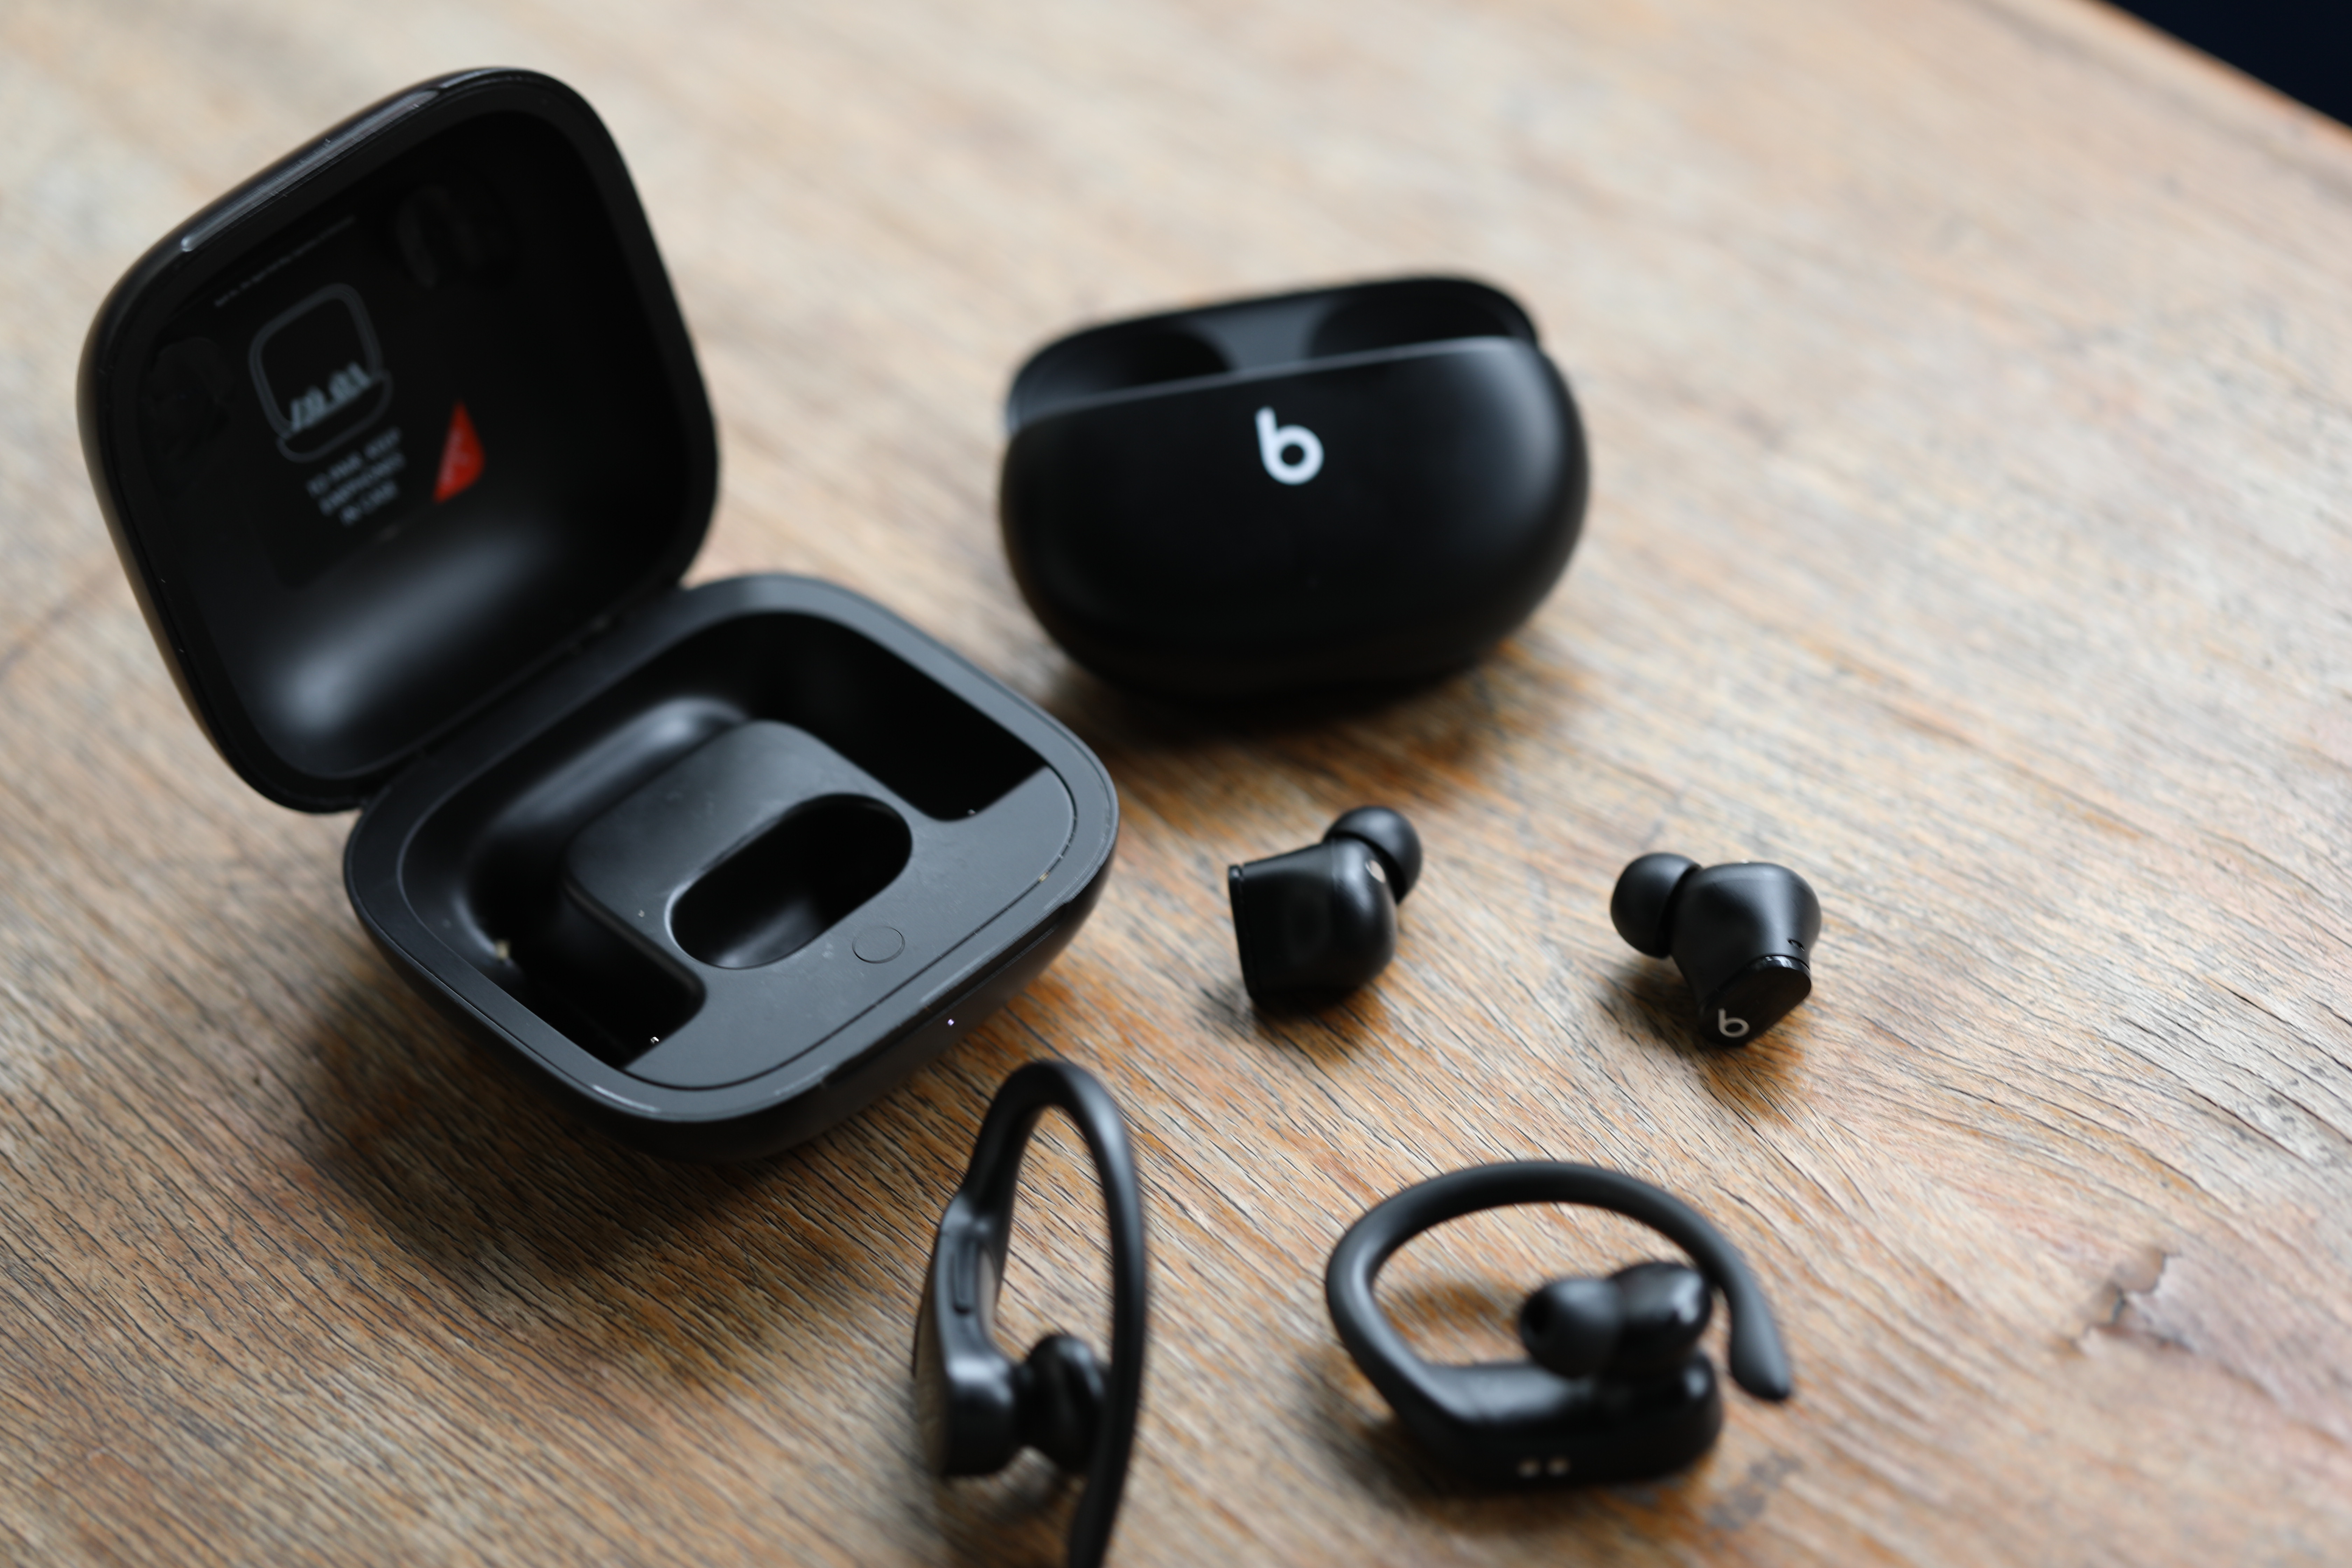 Beats Studio Buds offer a compact design, noise-canceling and 